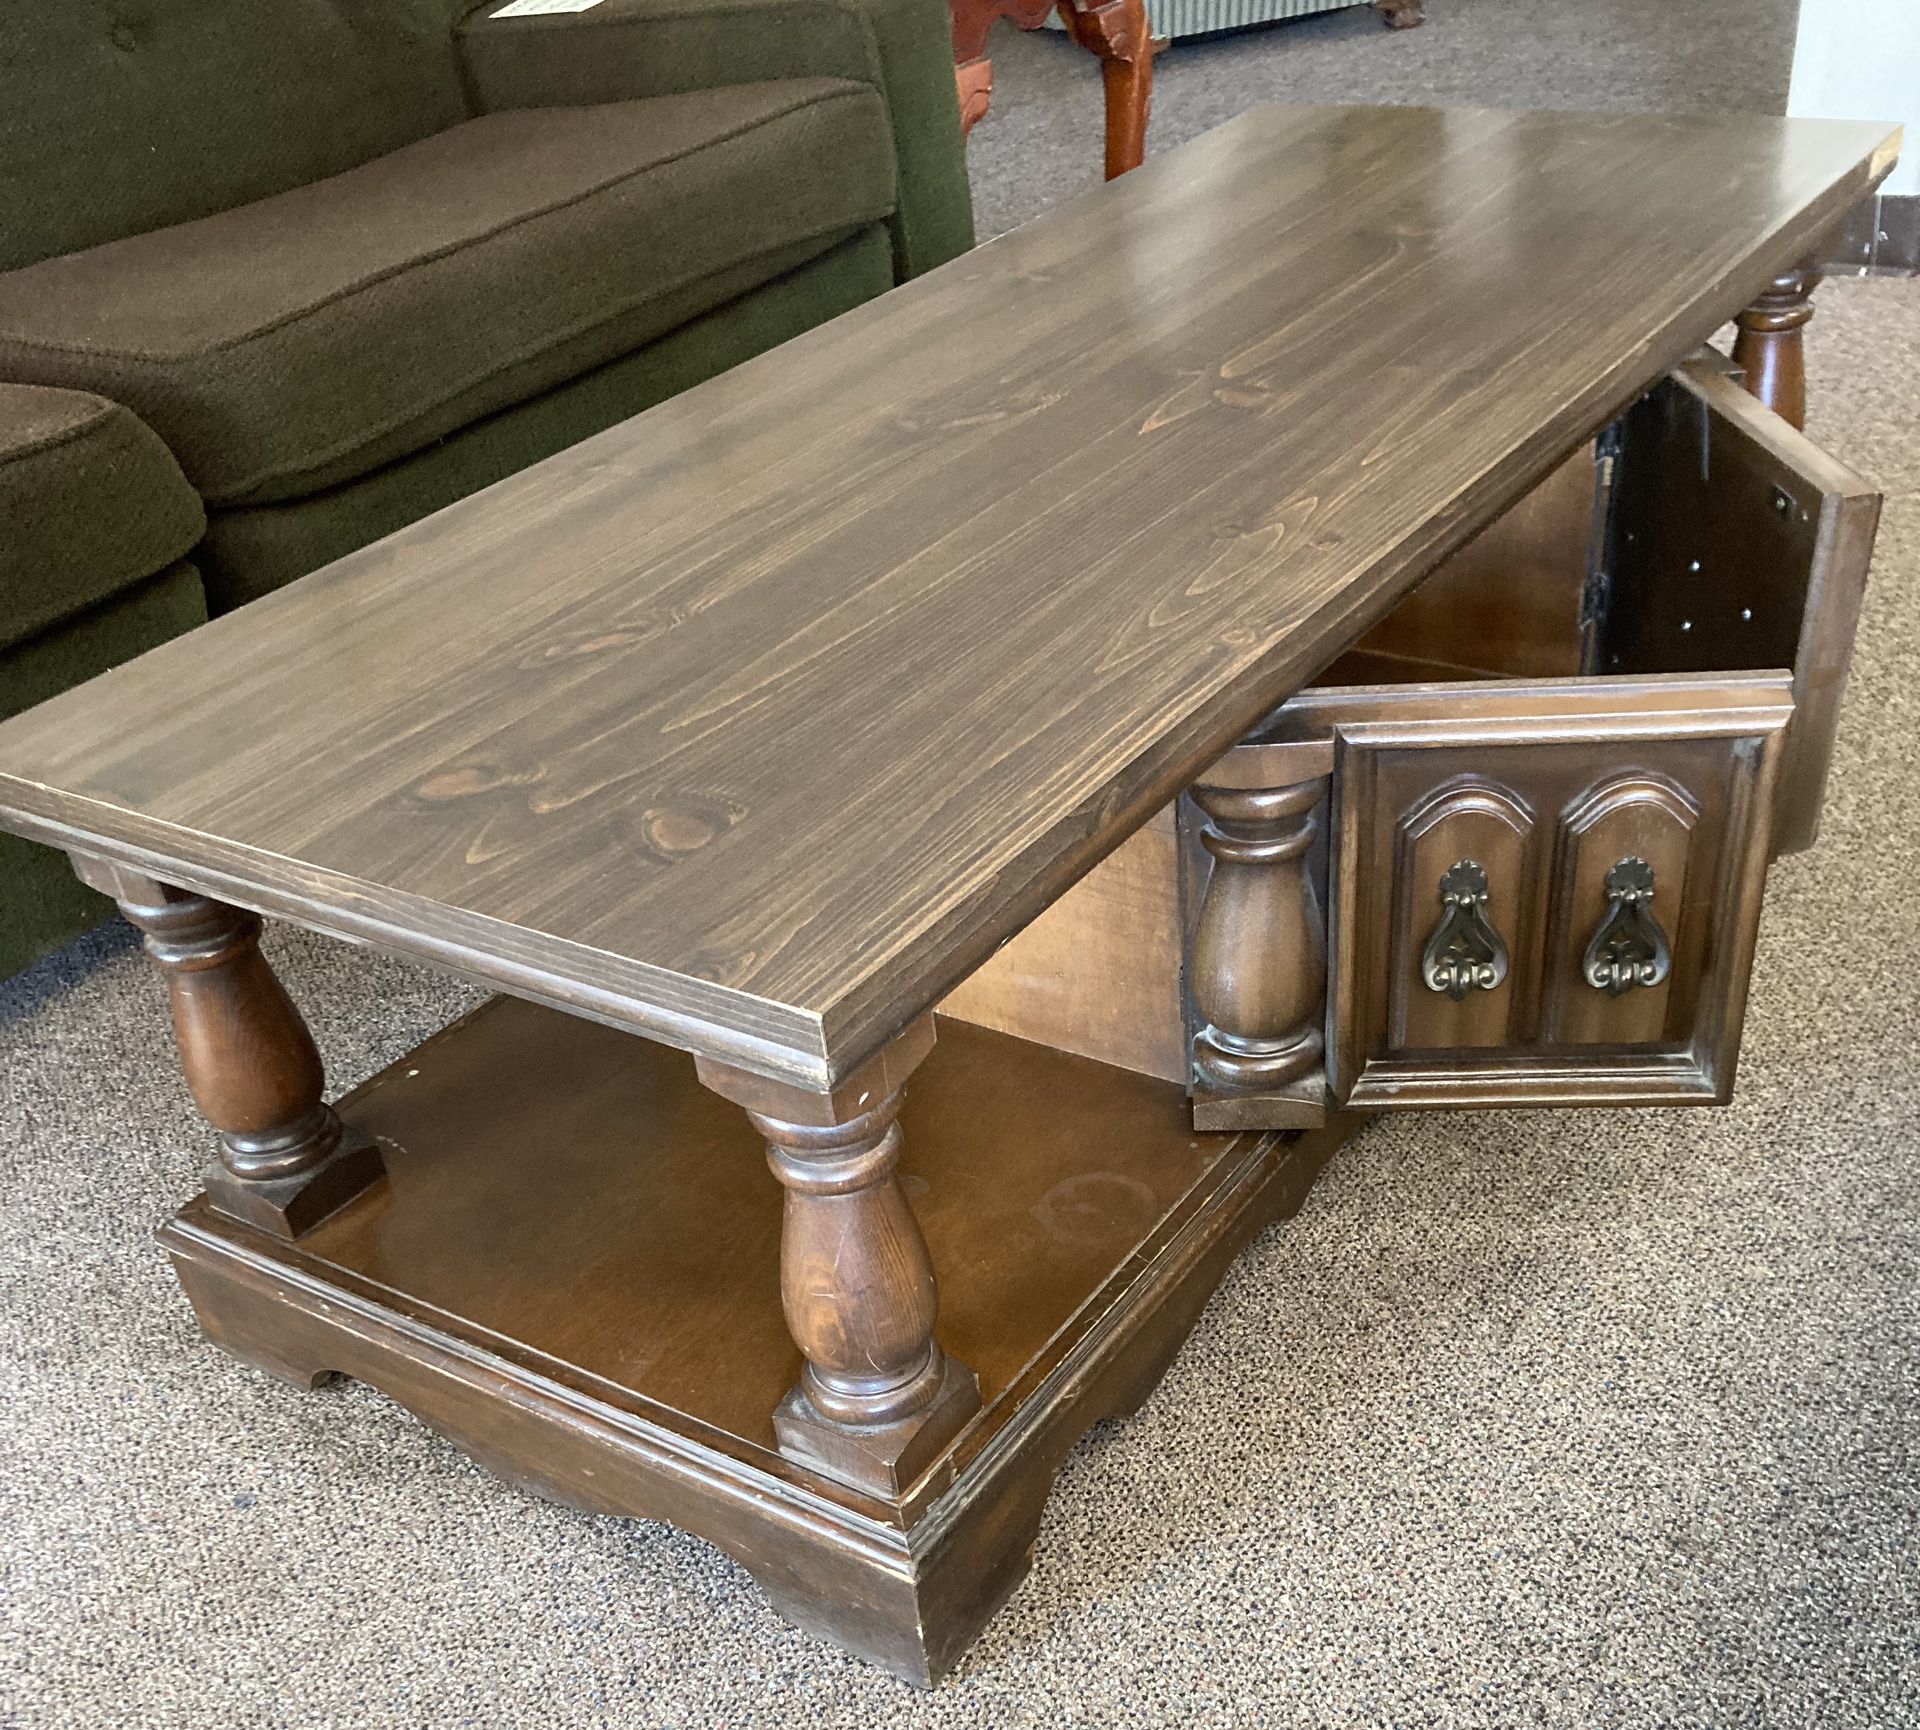 Vintage Coffee Table - Upcycle Piece!